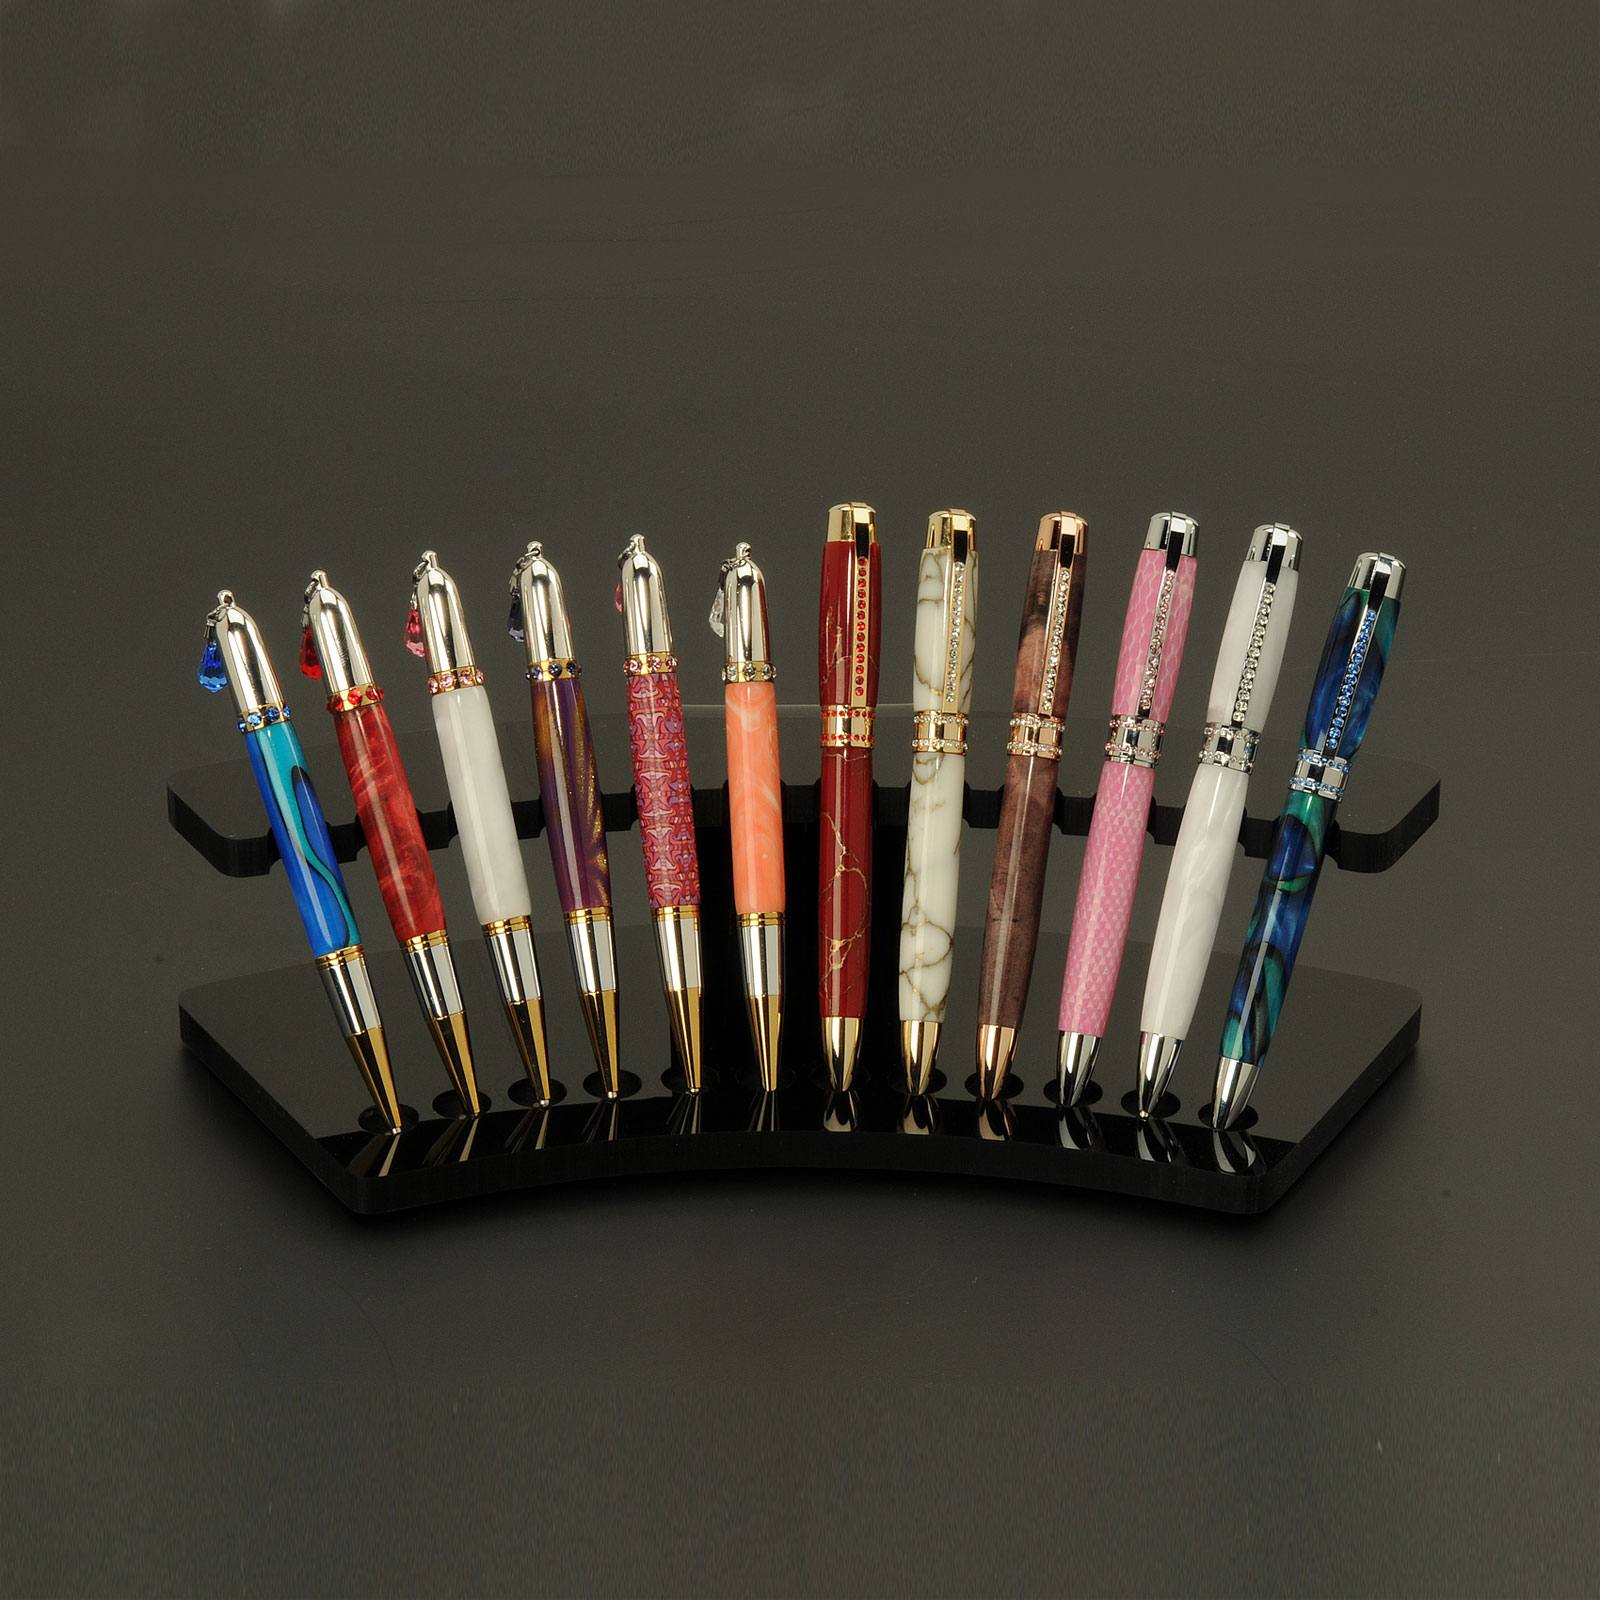 Black 2 Pieces Acrylic Pen Holder Display Stand Pencil Display Holder Fountain Pen Ballpoint Pen Display Rack Desk Pencil Wand Holder Showcase Paintbrush Drying Rack for Home Office School 